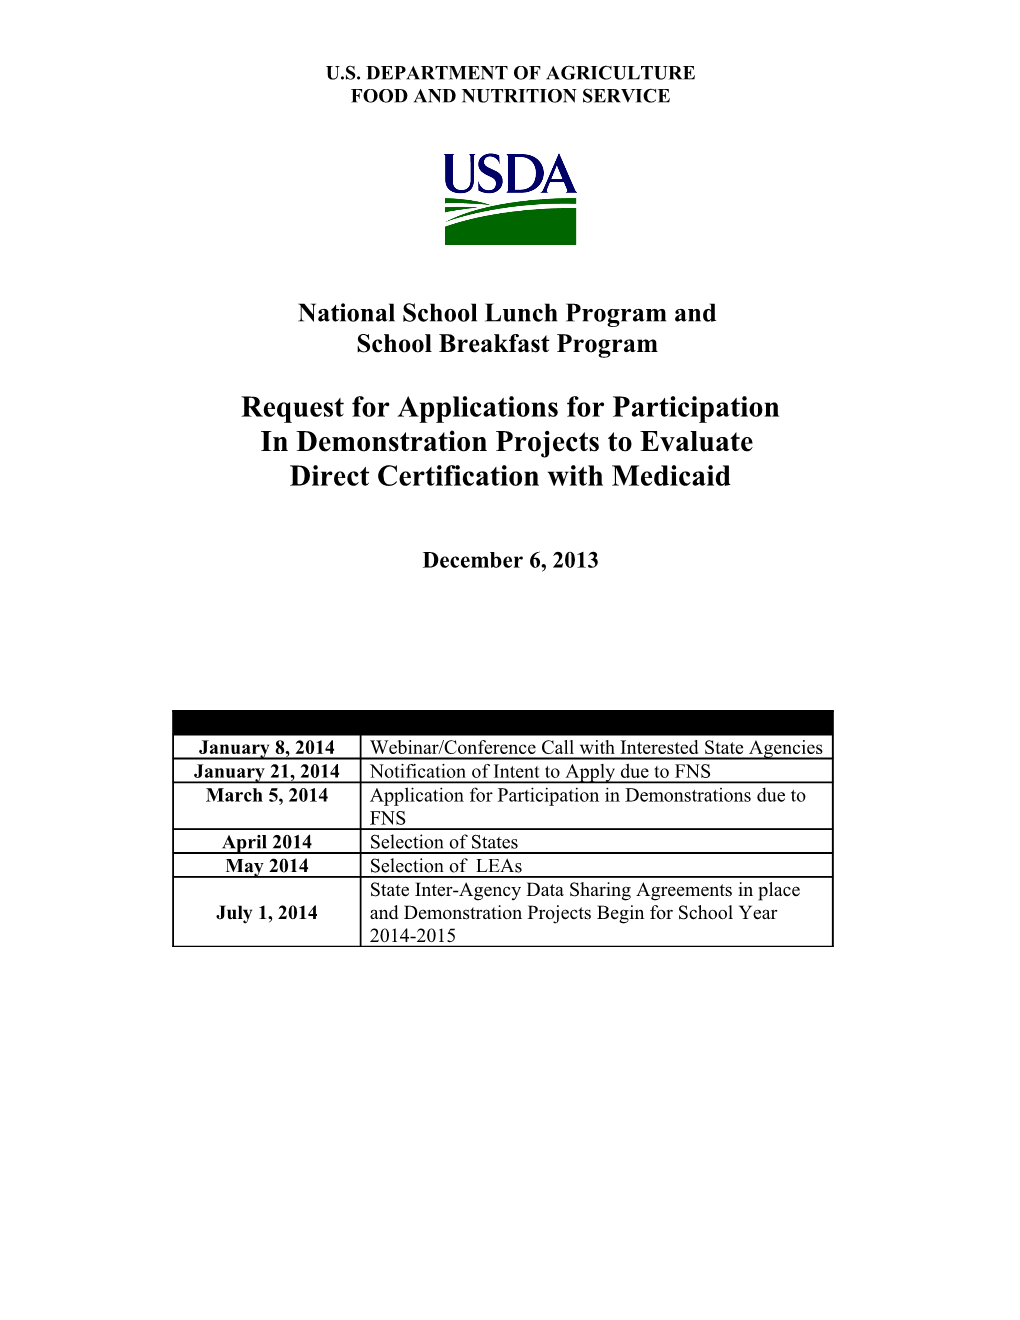 Demonstration Projects to Evaluate Direct Certification with Medicaid